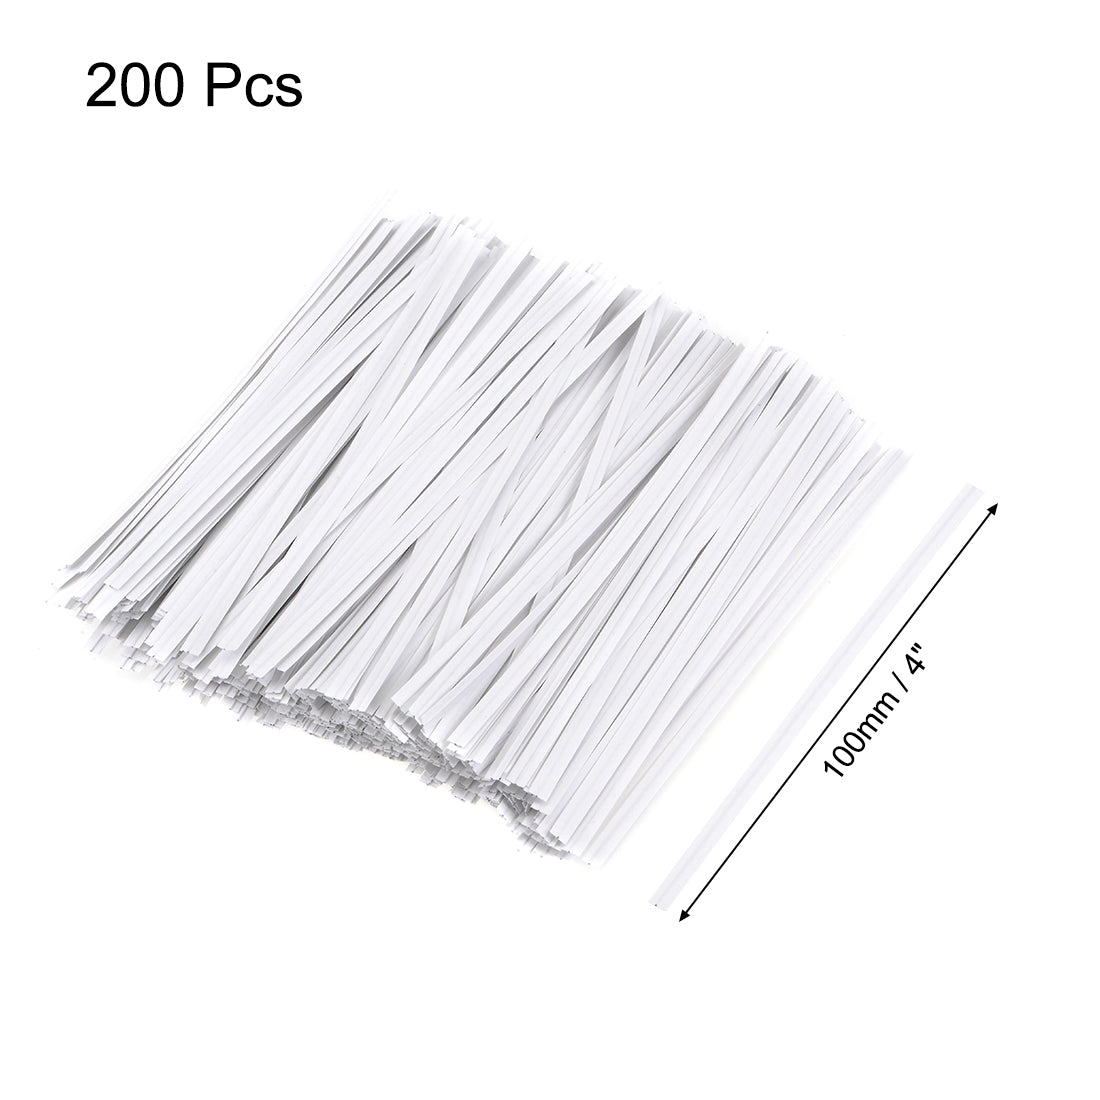 uxcell Uxcell Long Strong Paper Twist Ties 4 Inches Quality Tie for Tying Gift Bags Art Craft Ties Manage Cords White 200pcs